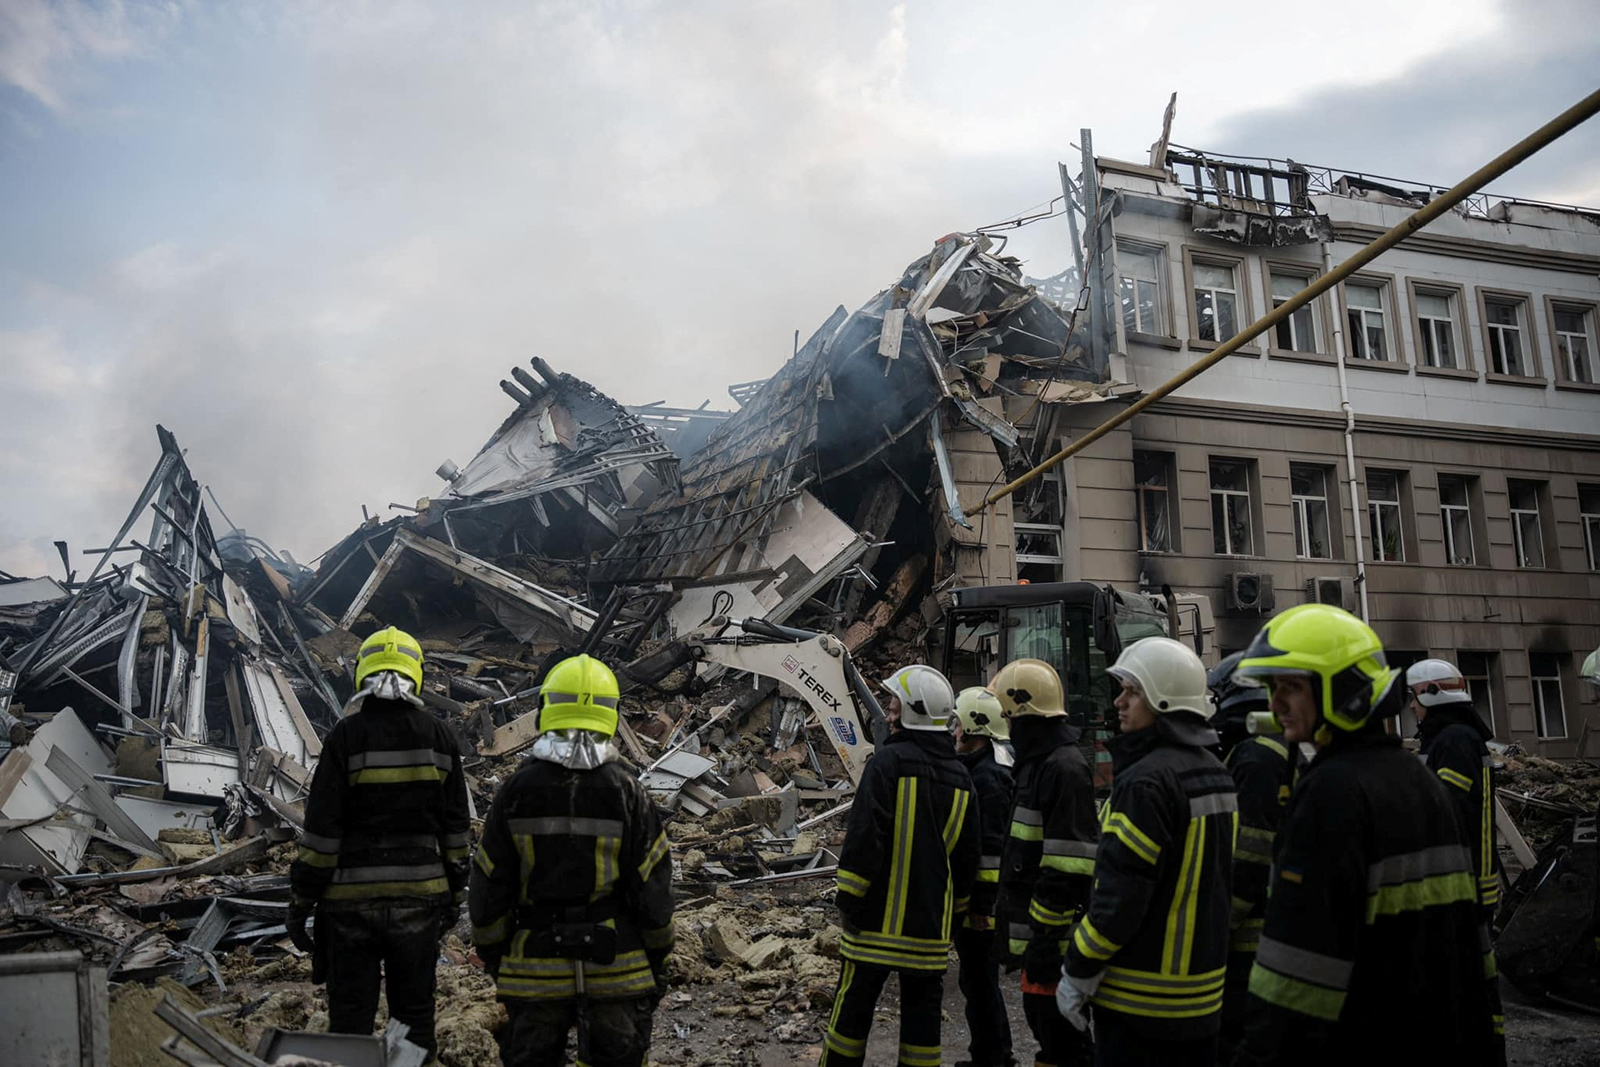 Rescuers work at a site of an administrative building heavily damaged by a Russian missile strike, in Odesa, Ukraine on July 20.